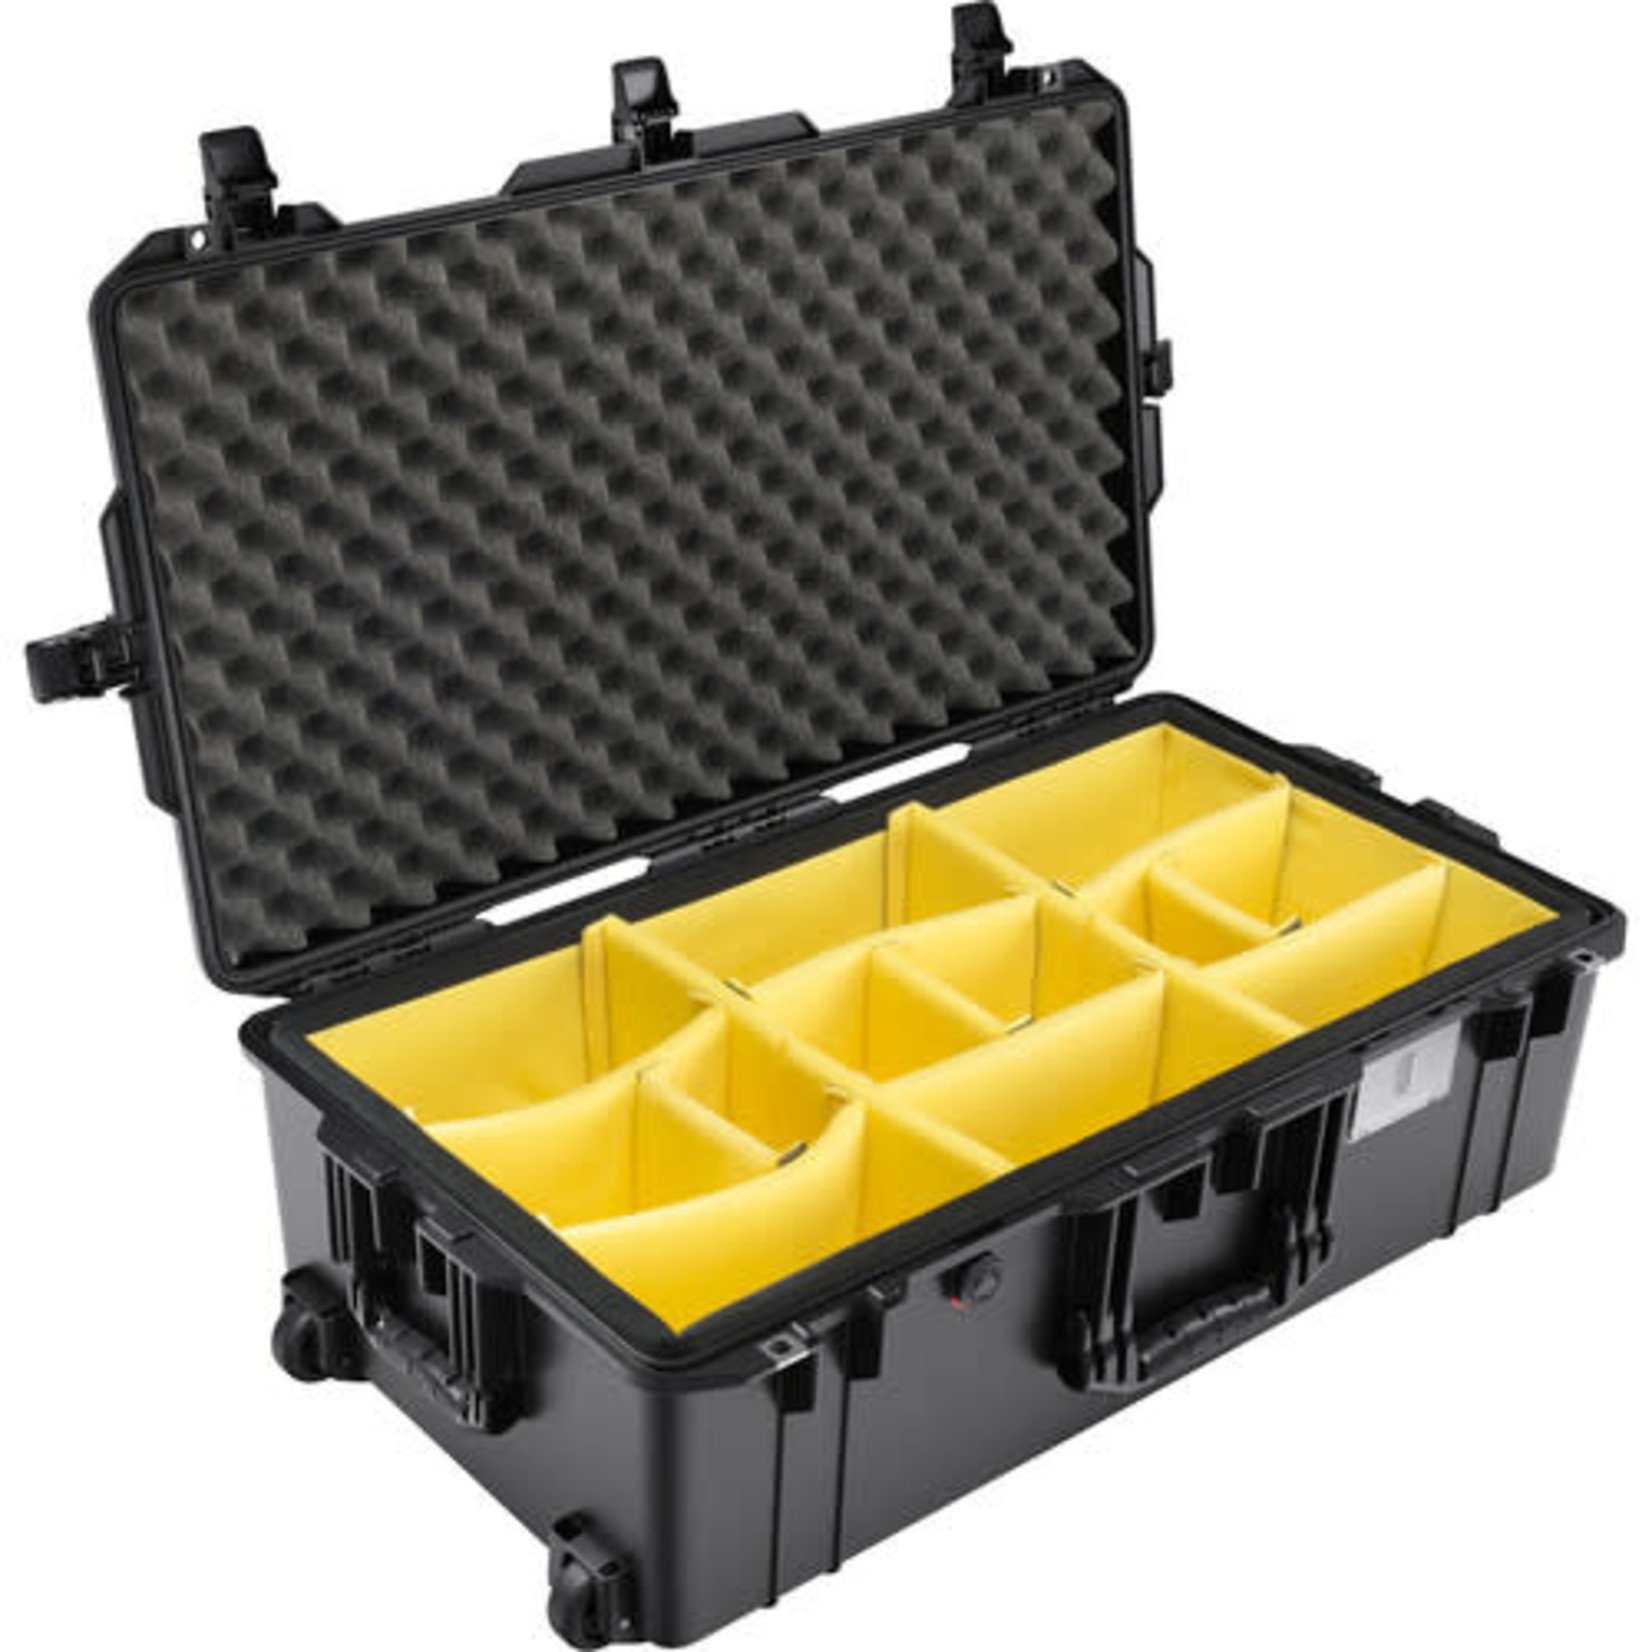 Pelican Pelican 1615AirWD Wheeled Hard Case with Divider Insert (Black)